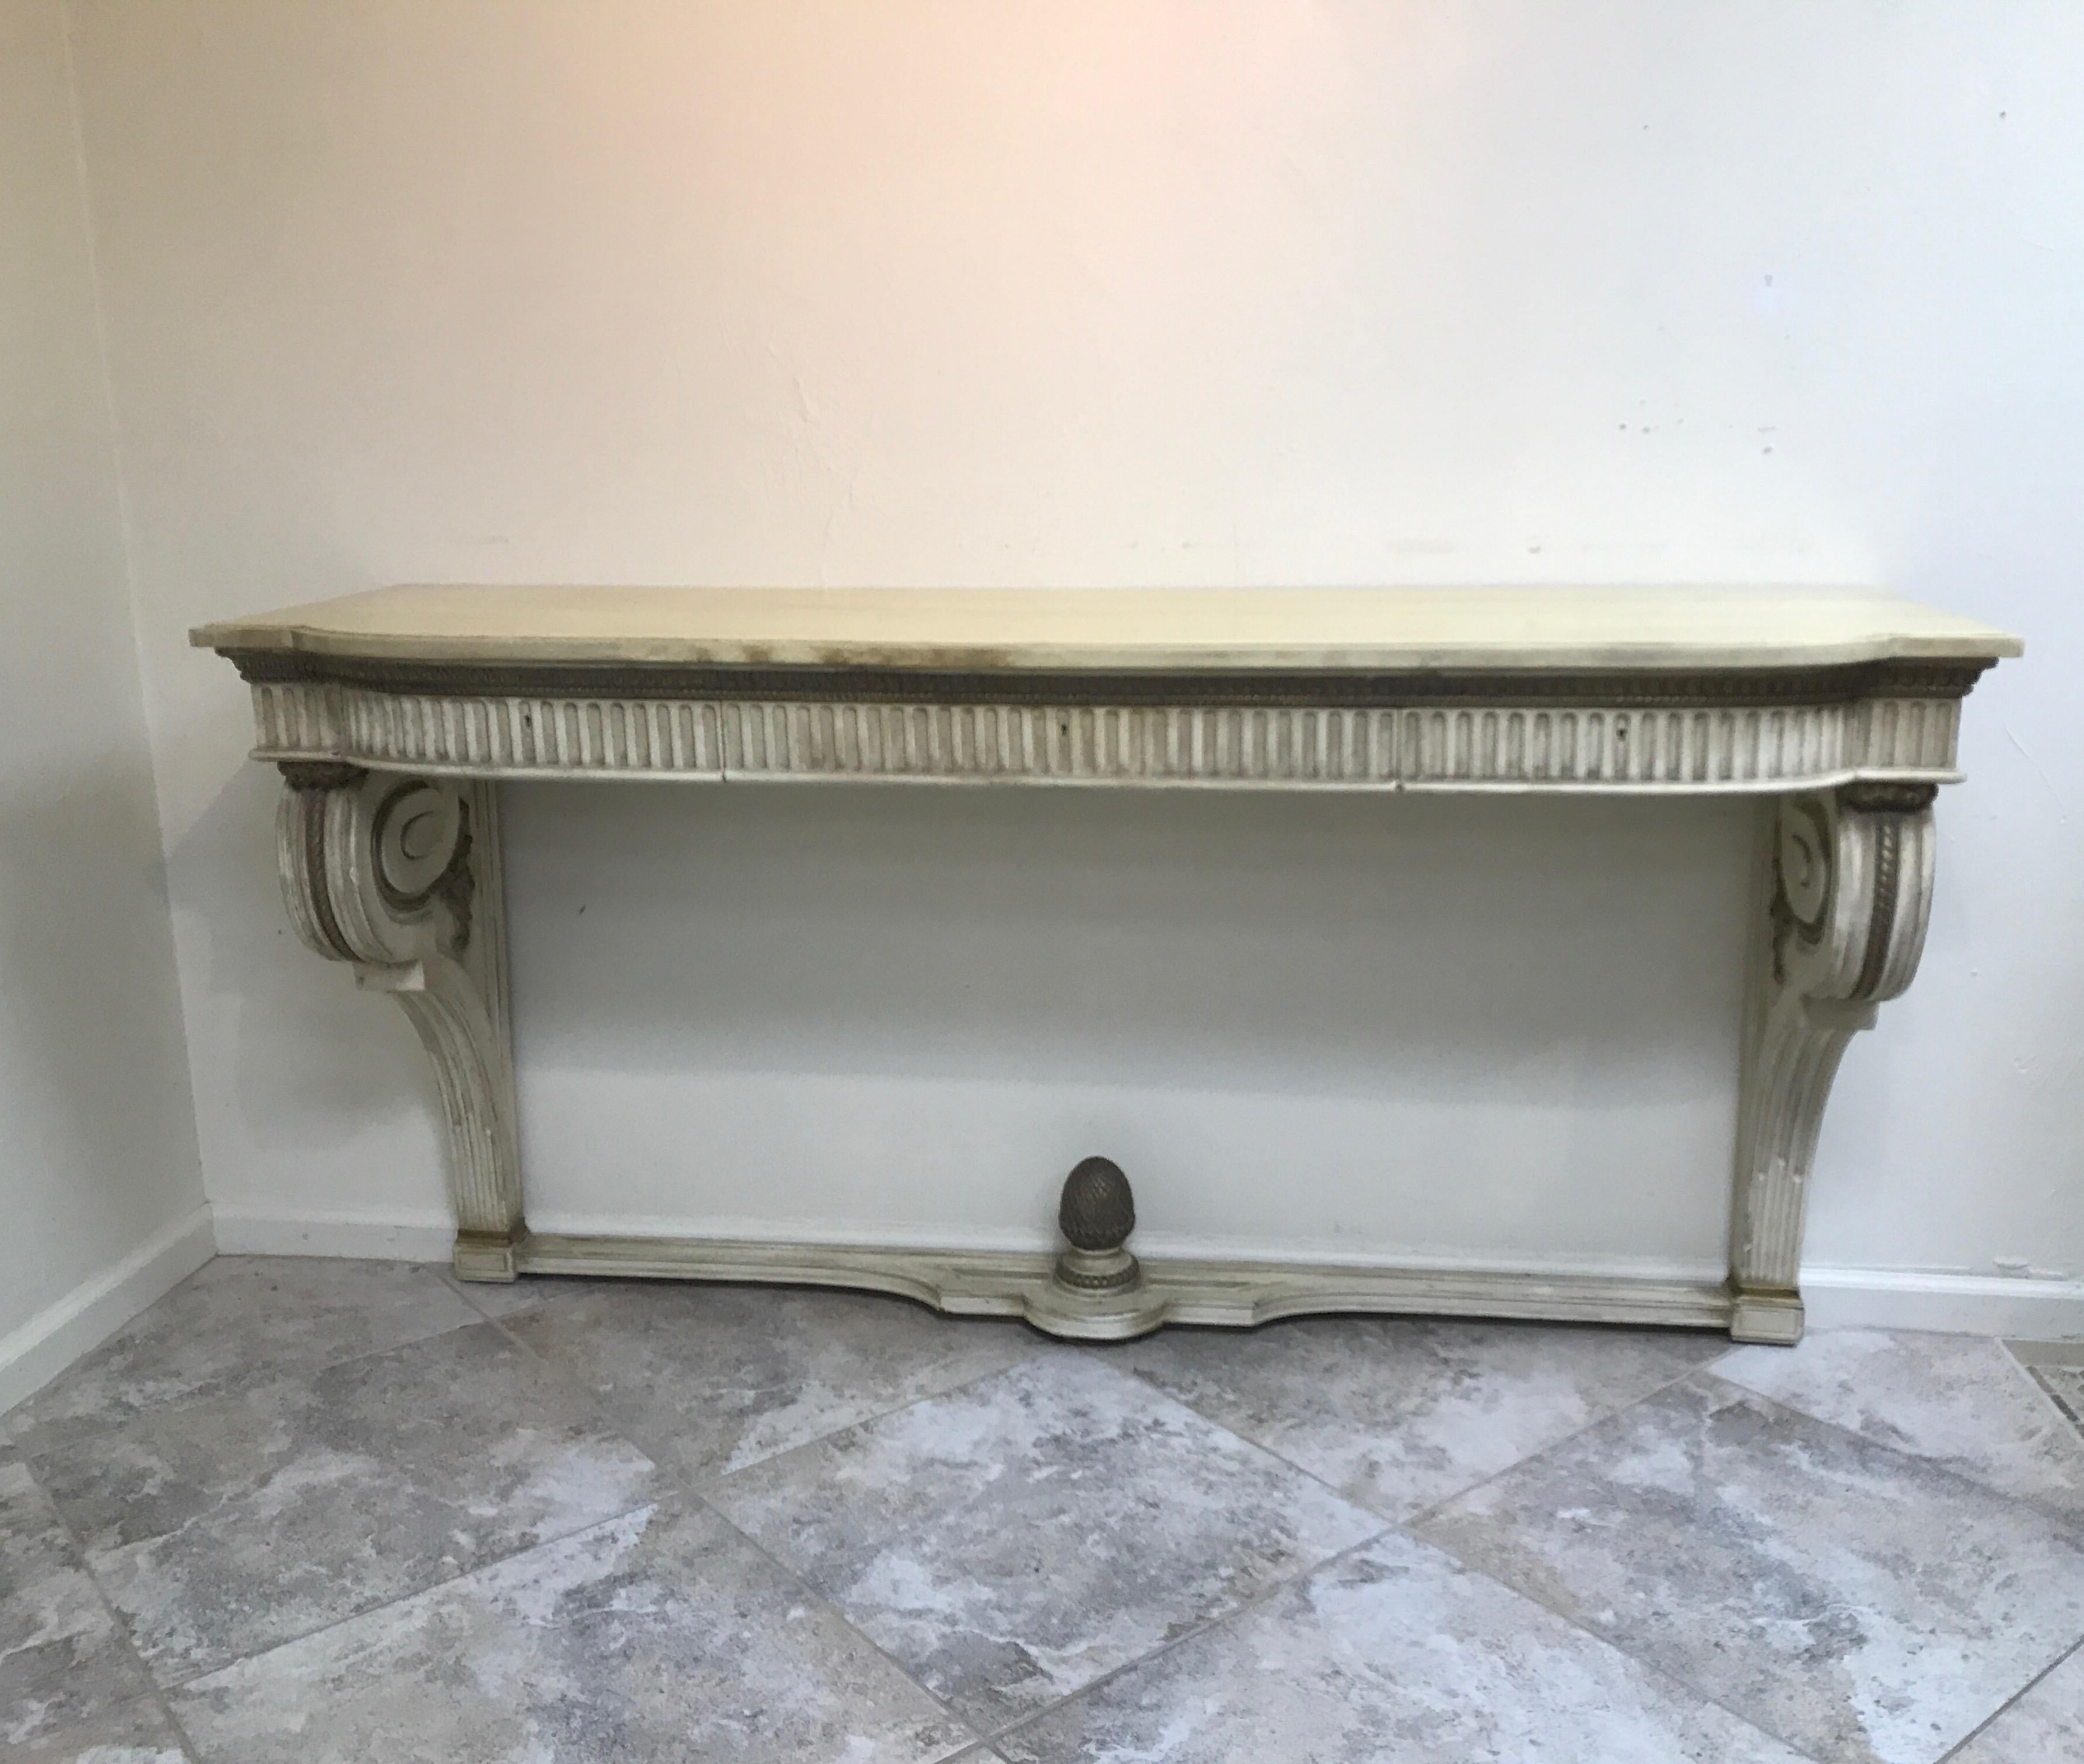 Midcentury painted wood console with faux painted marble top. Console has three ample drawers for storage. It mounts to the wall and features a carved wood gilded pineapple at base.